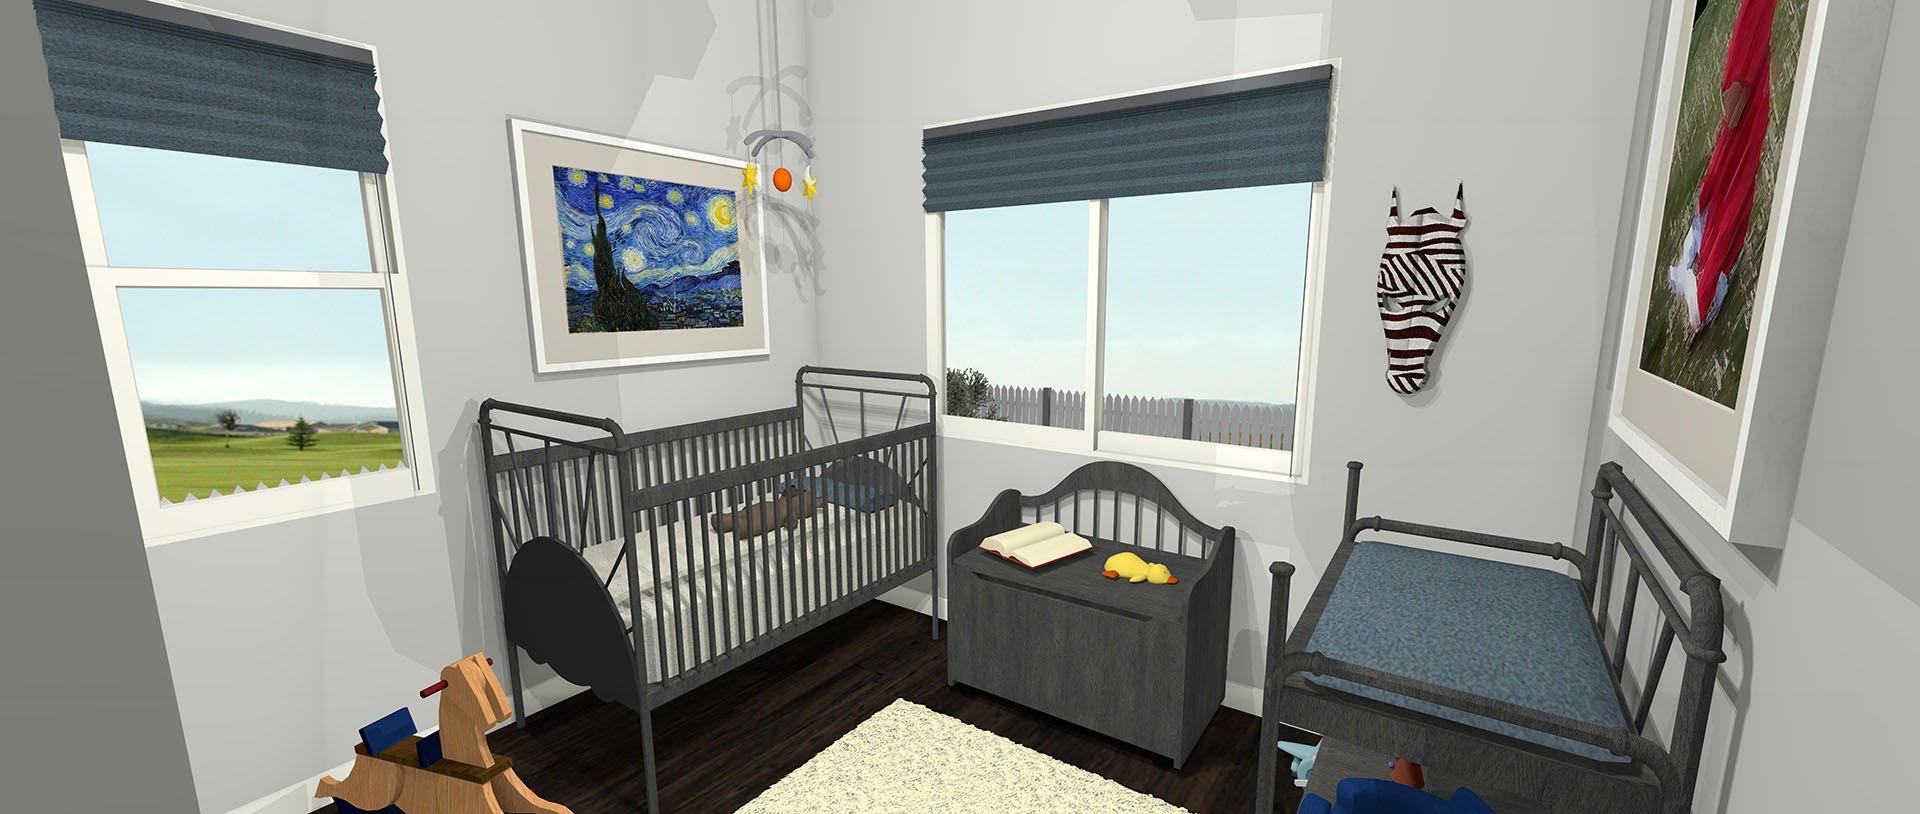 Nursery room with baby crib and toys